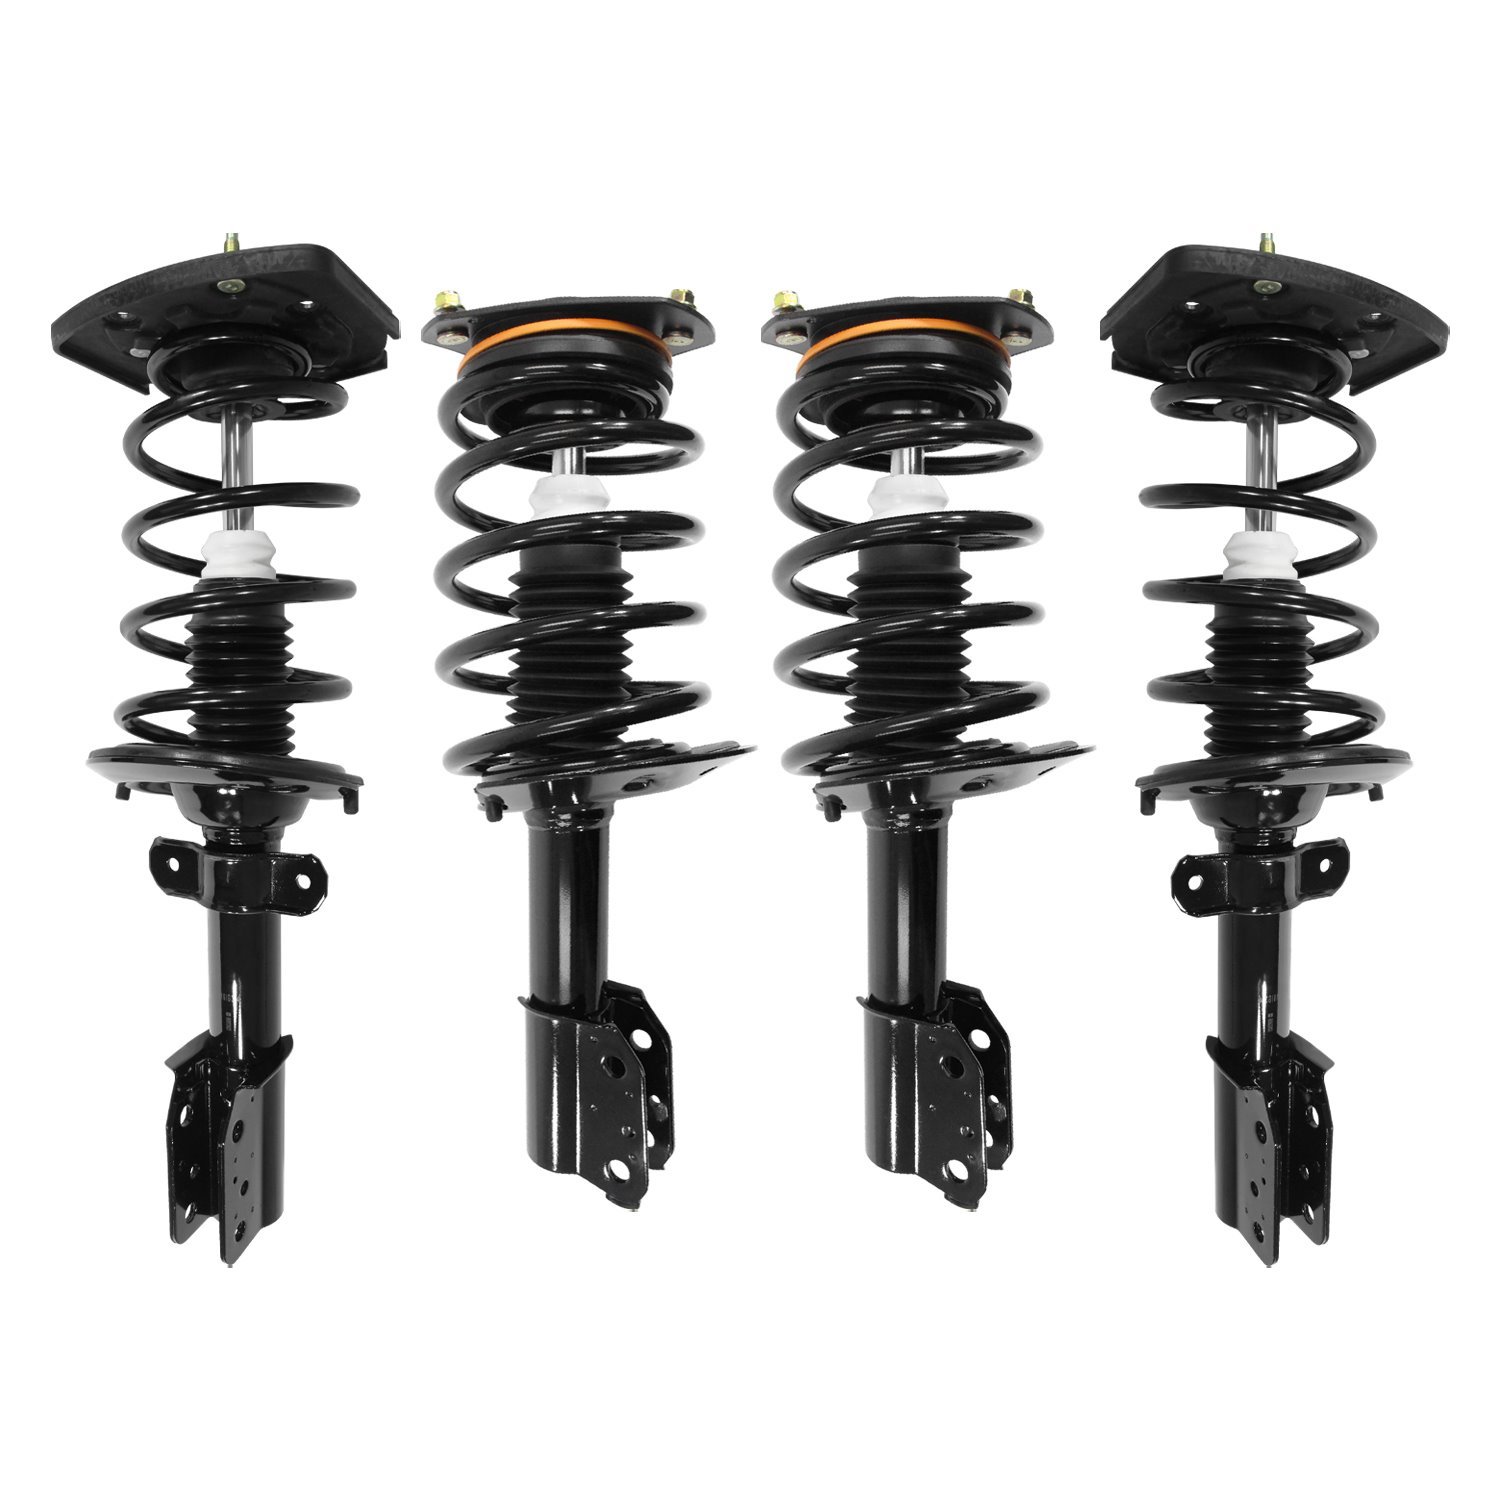 4-13100-15313-001 Front & Rear Suspension Strut & Coil Spring Assemby Set Fits Select Chevy Impala